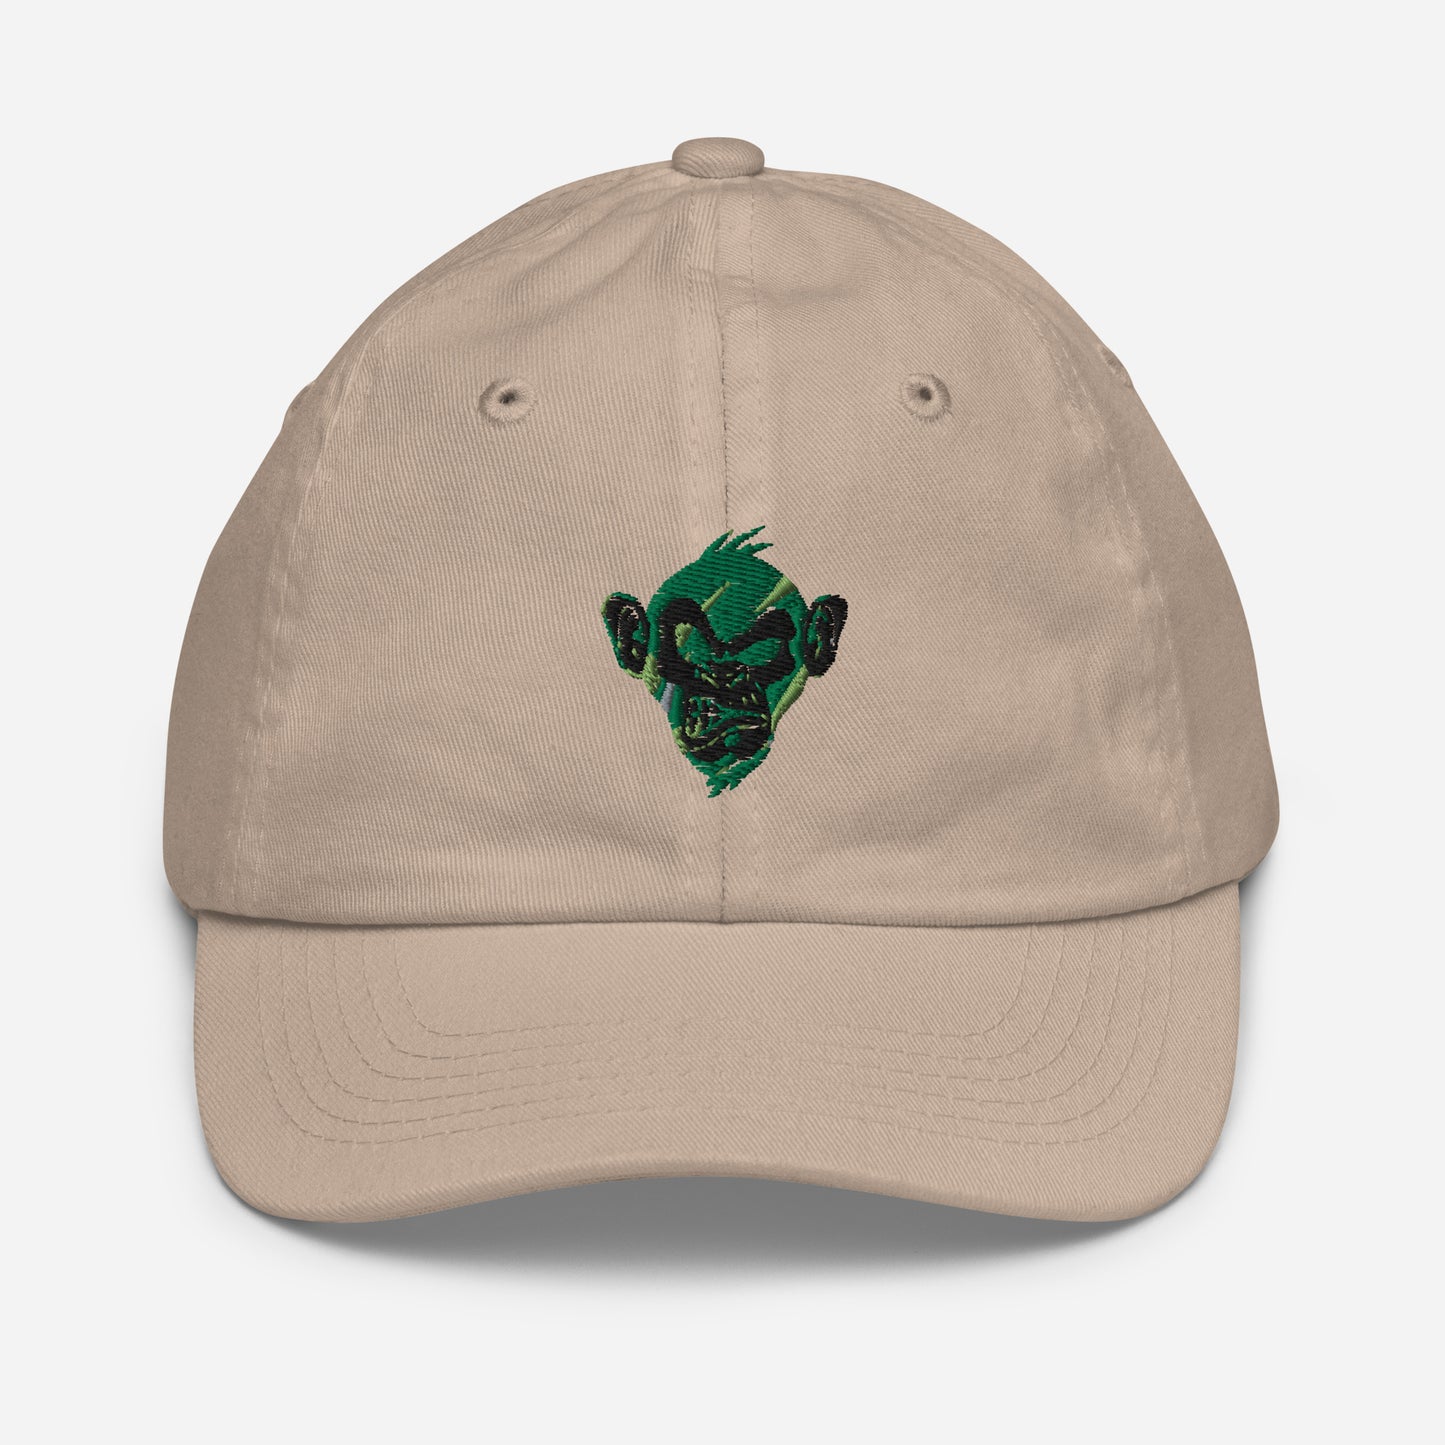 Khaki baseball cap foor Youth with print of a Cool monkey in black light green